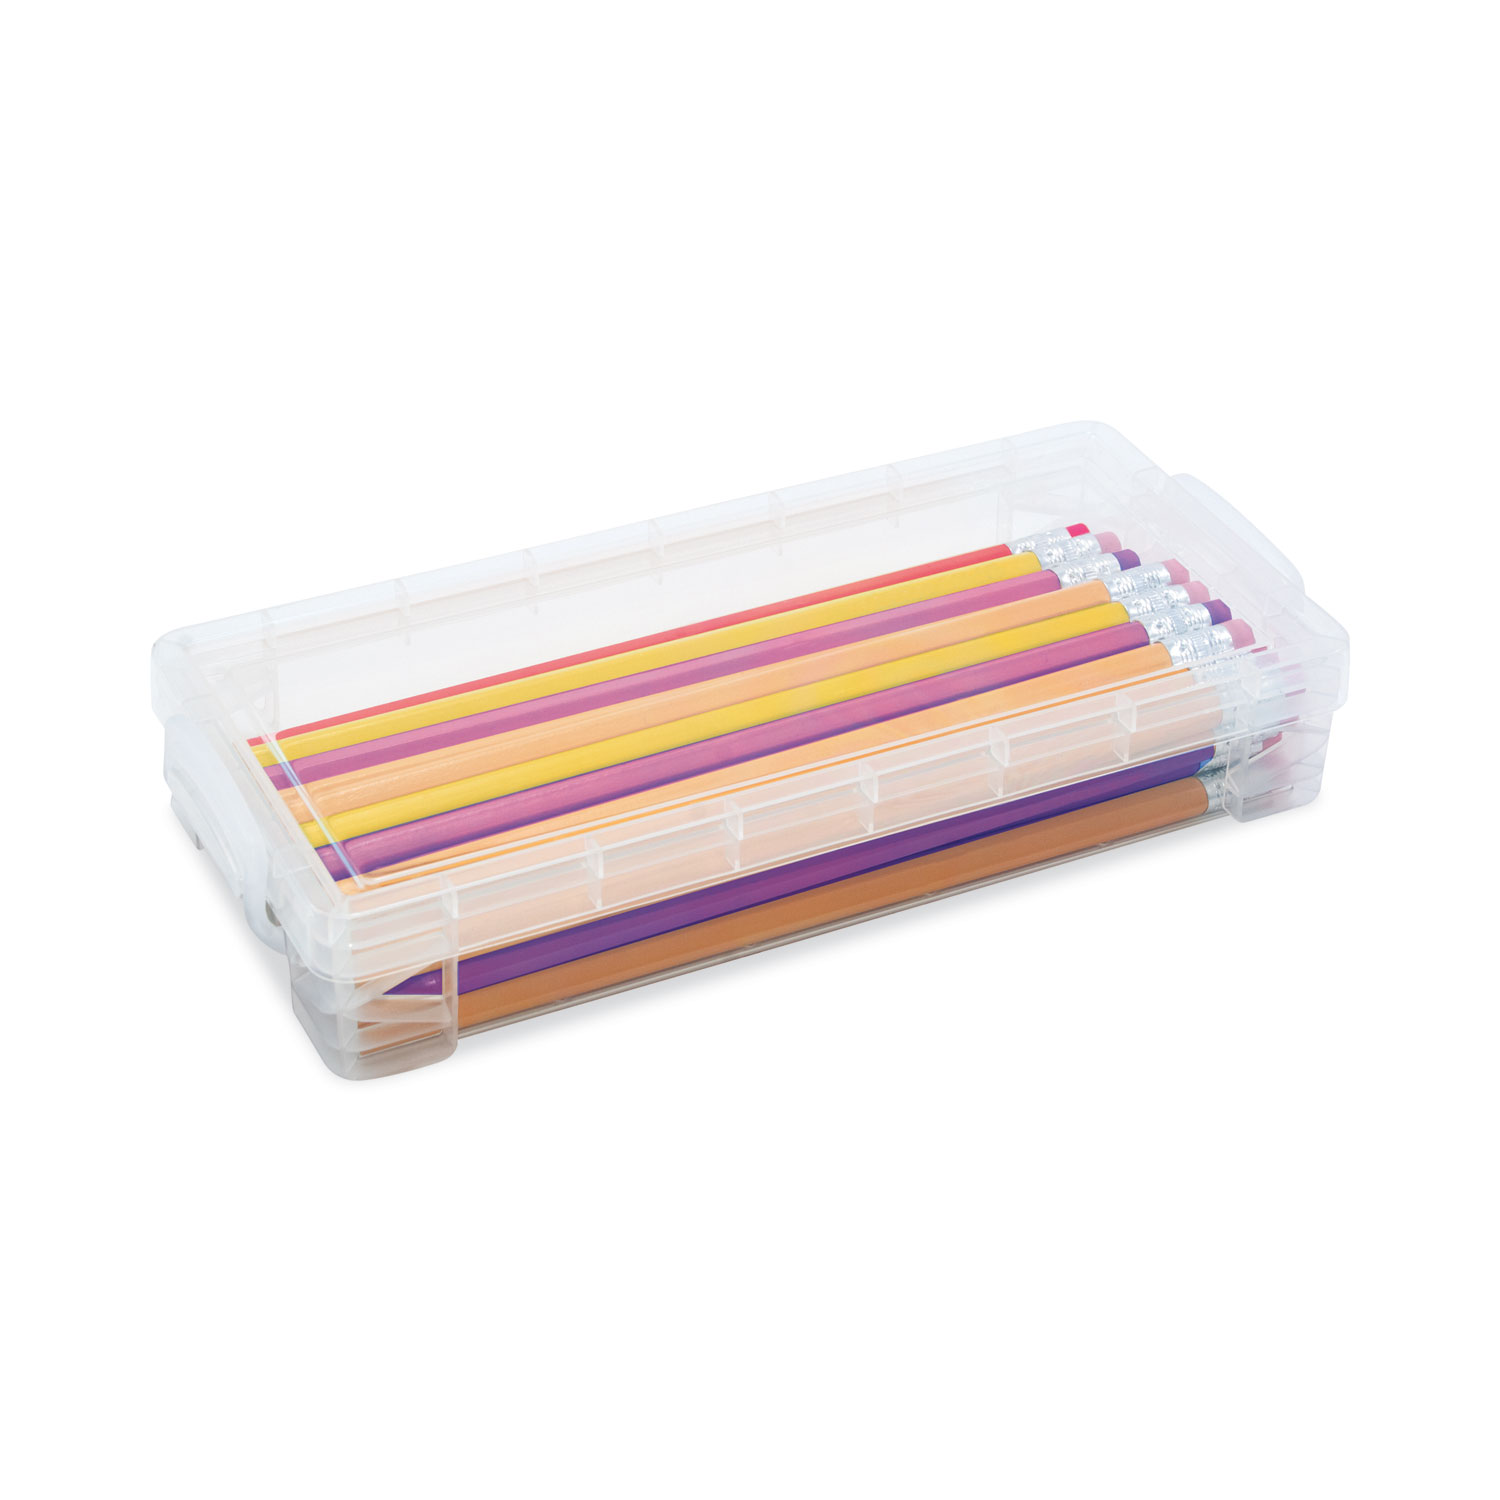  Advantus Super Stacker Quick Access Crayon Box, Plastic,  Clear : Learning: Supplies